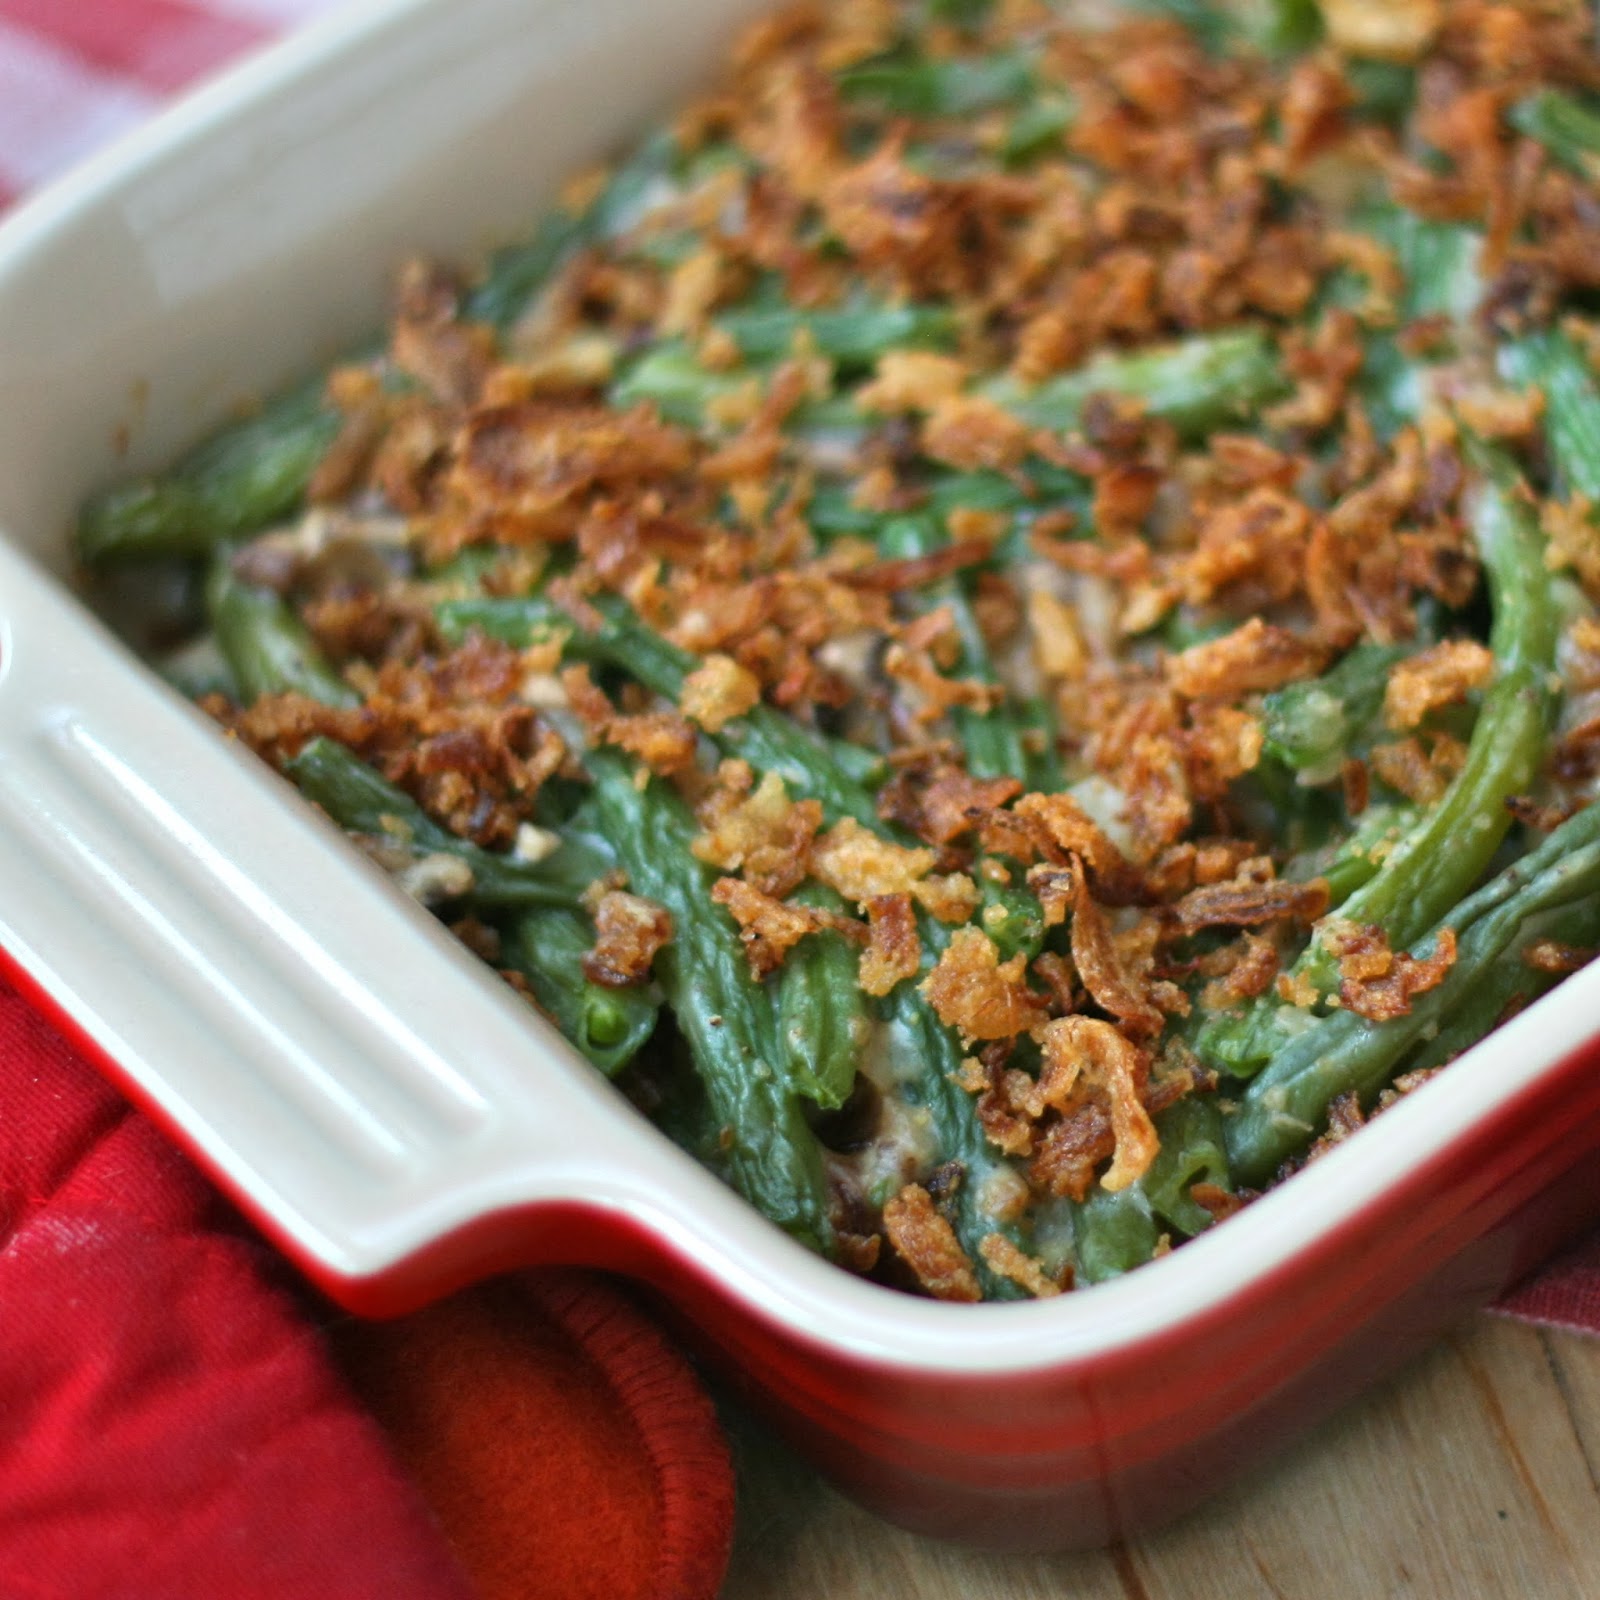 G is for: Green Bean Casserole with homemade ingredients - e is for eat